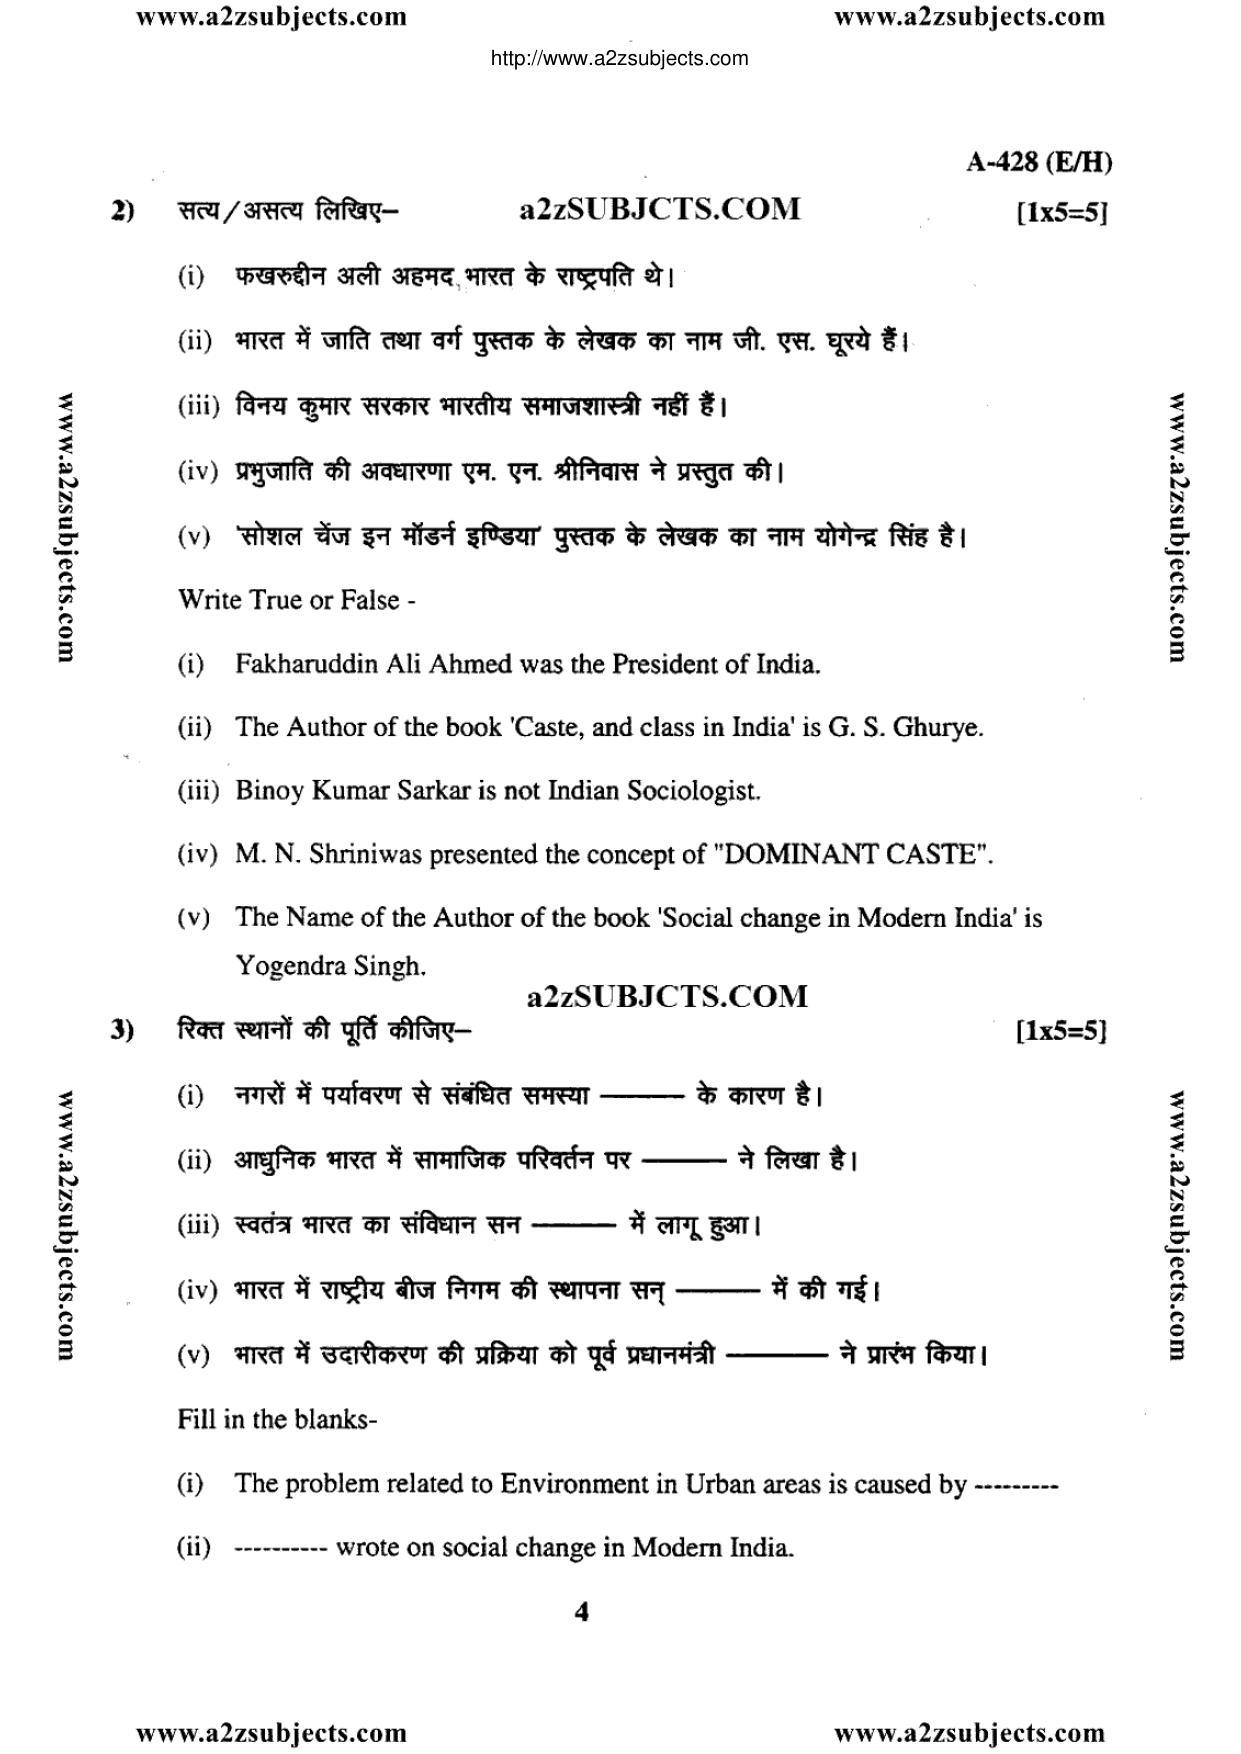 MP Board Class 12 Sociology 2017 Question Paper - Page 4